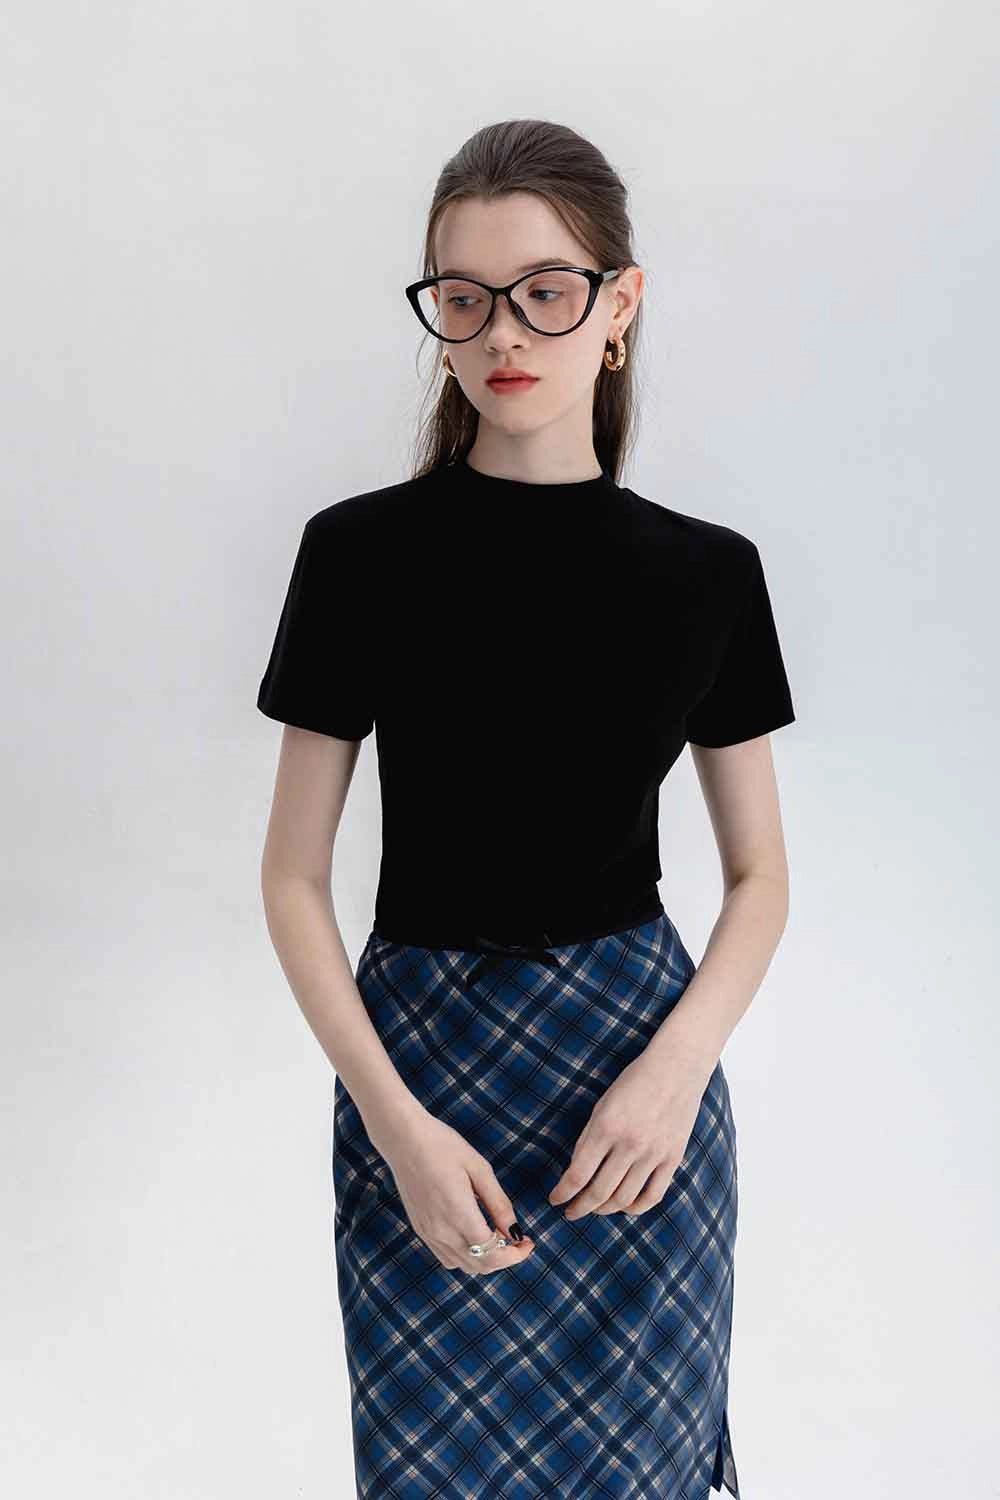 Women's Plaid Pencil Skirt with Bow Detail